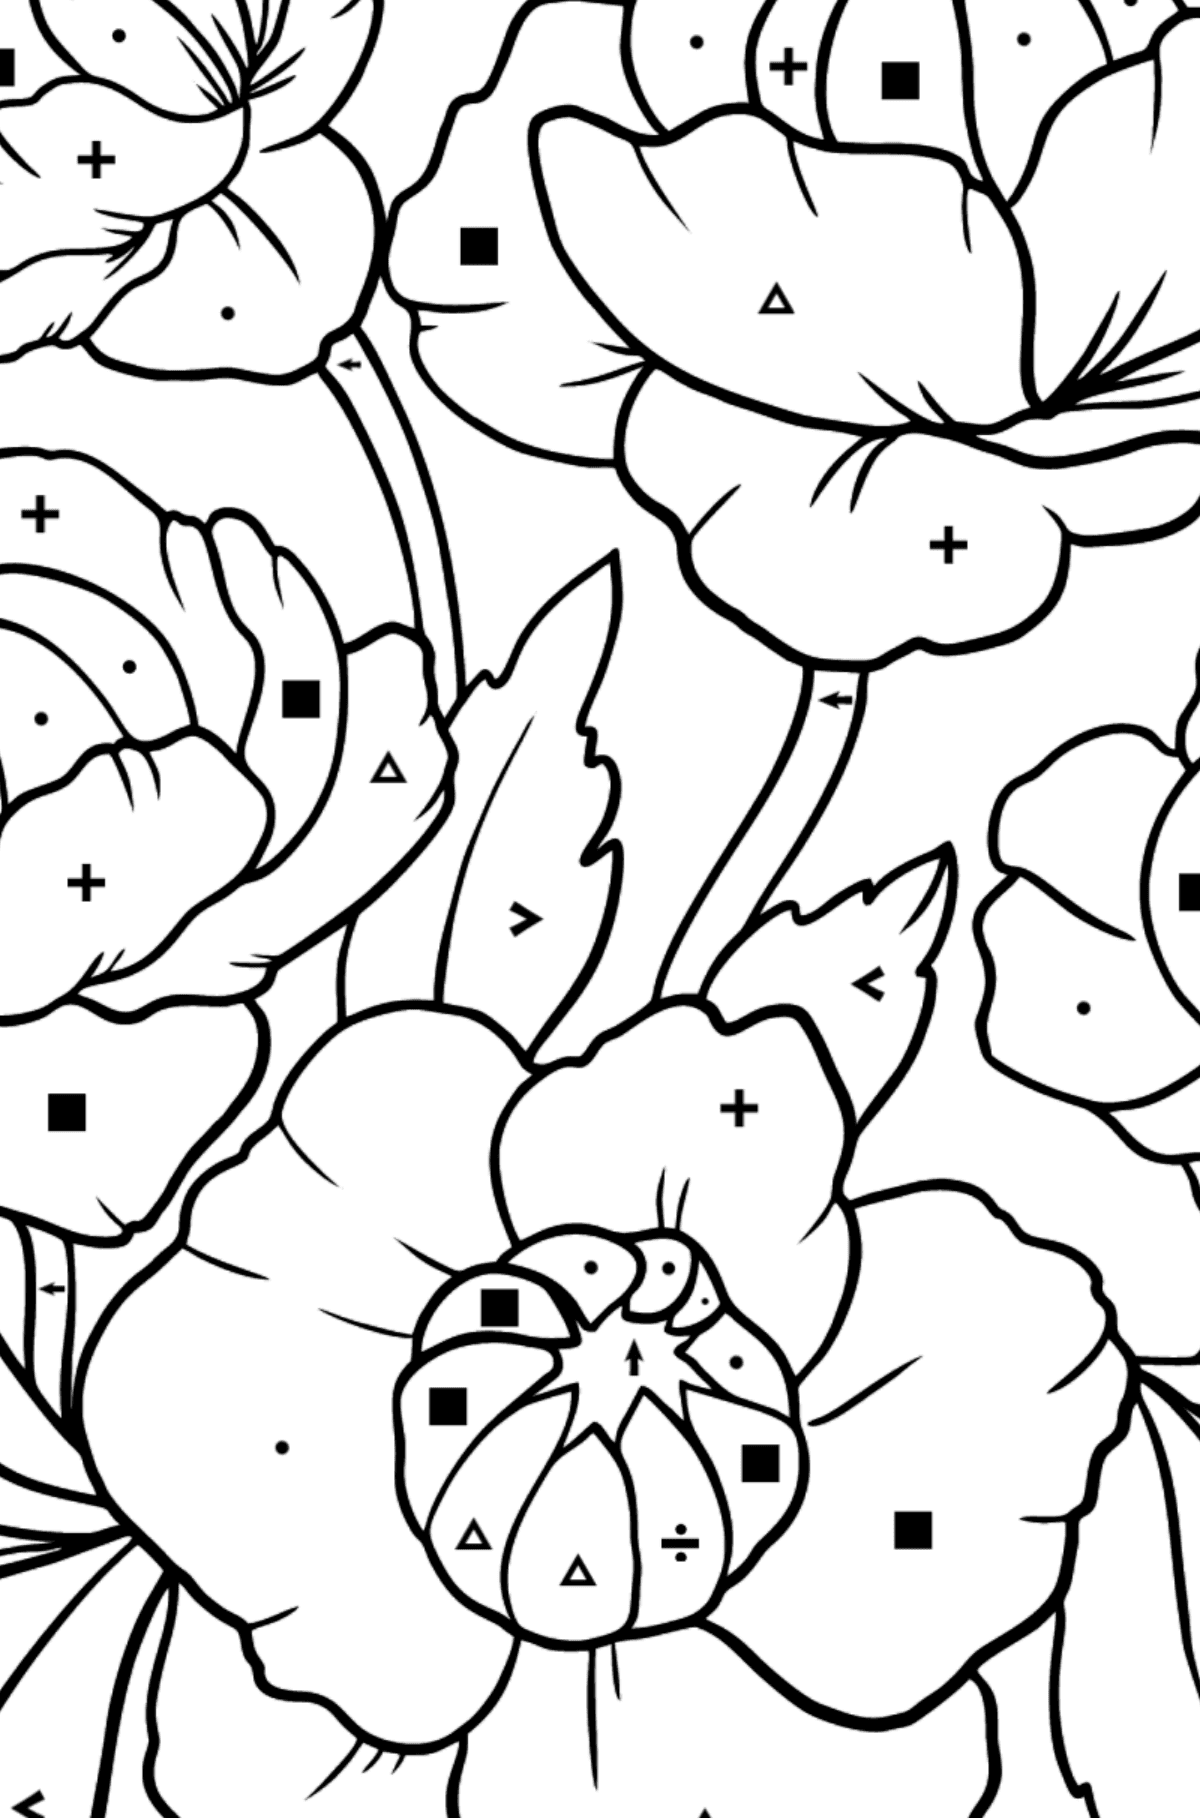 Red Globeflower Coloring Page - Coloring by Symbols for Kids